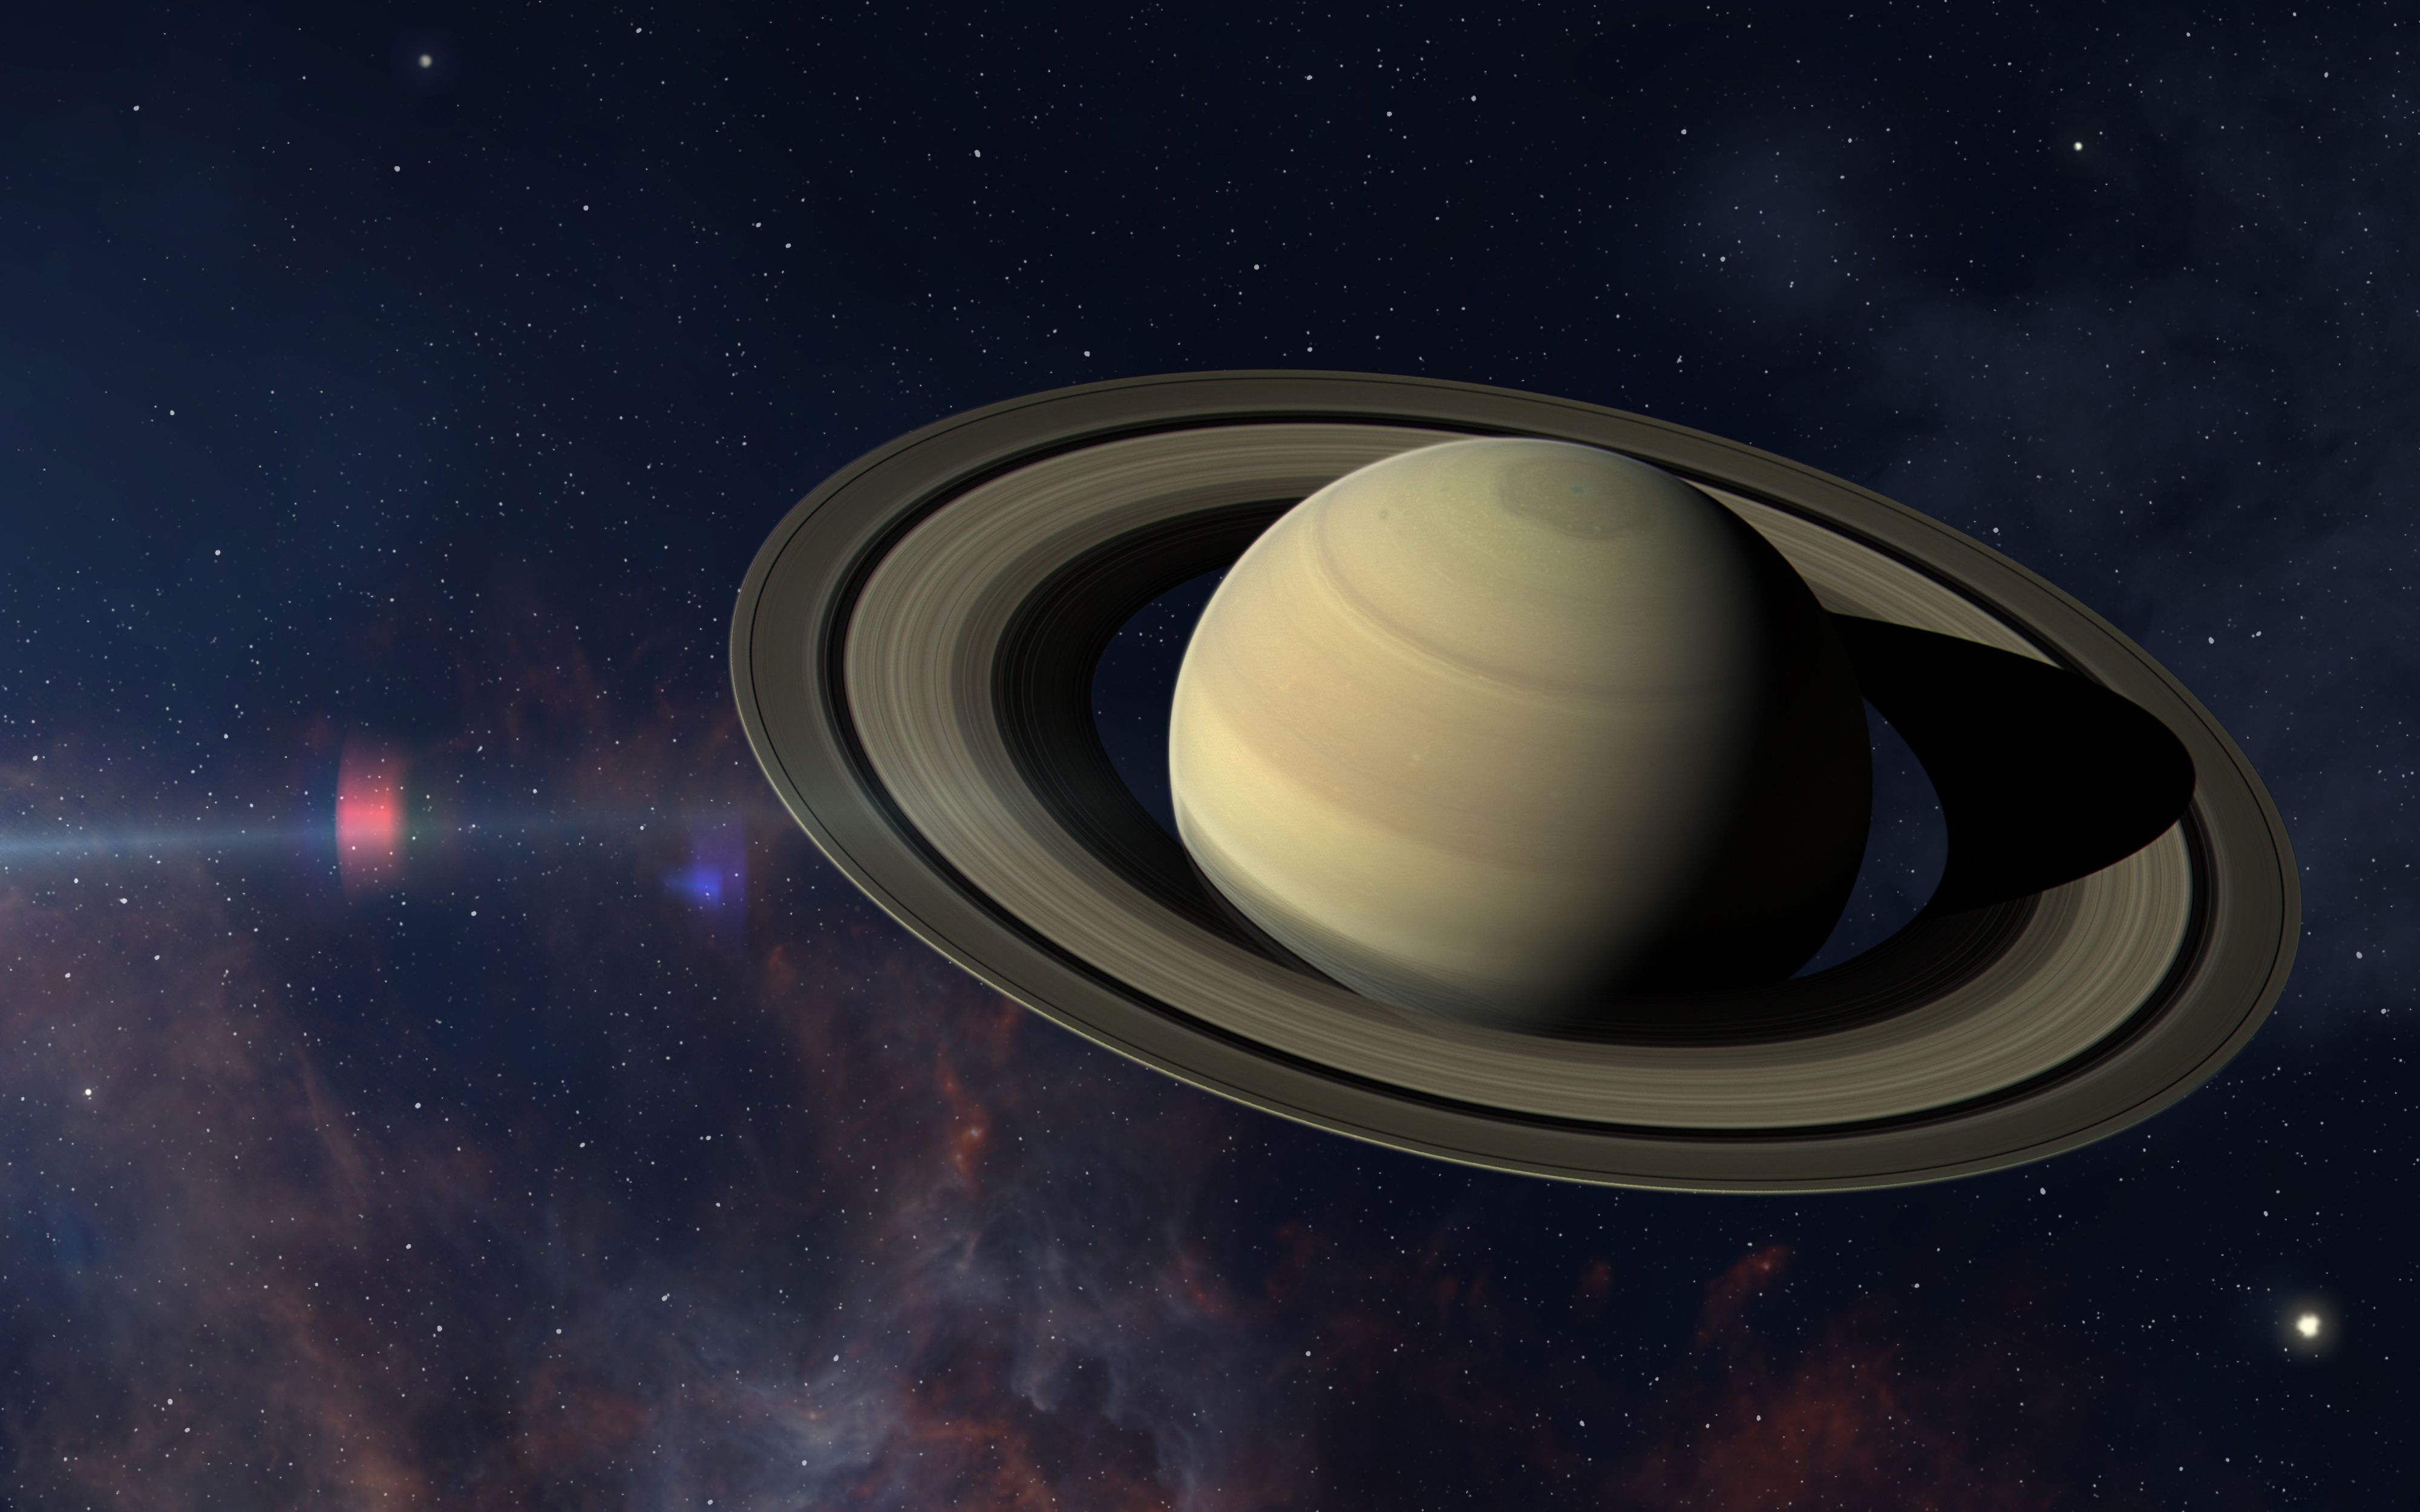 <p class="MsoNormal">From Earth, the rings of Saturn seem like sleek, unbroken circles. On closer inspection, one can observe that <a href="https://www.universetoday.com/33415/interesting-facts-about-the-planets/">the rings actually consist of rock and ice debris</a> that’s attracted to the planet’s gravitational pull.</p>